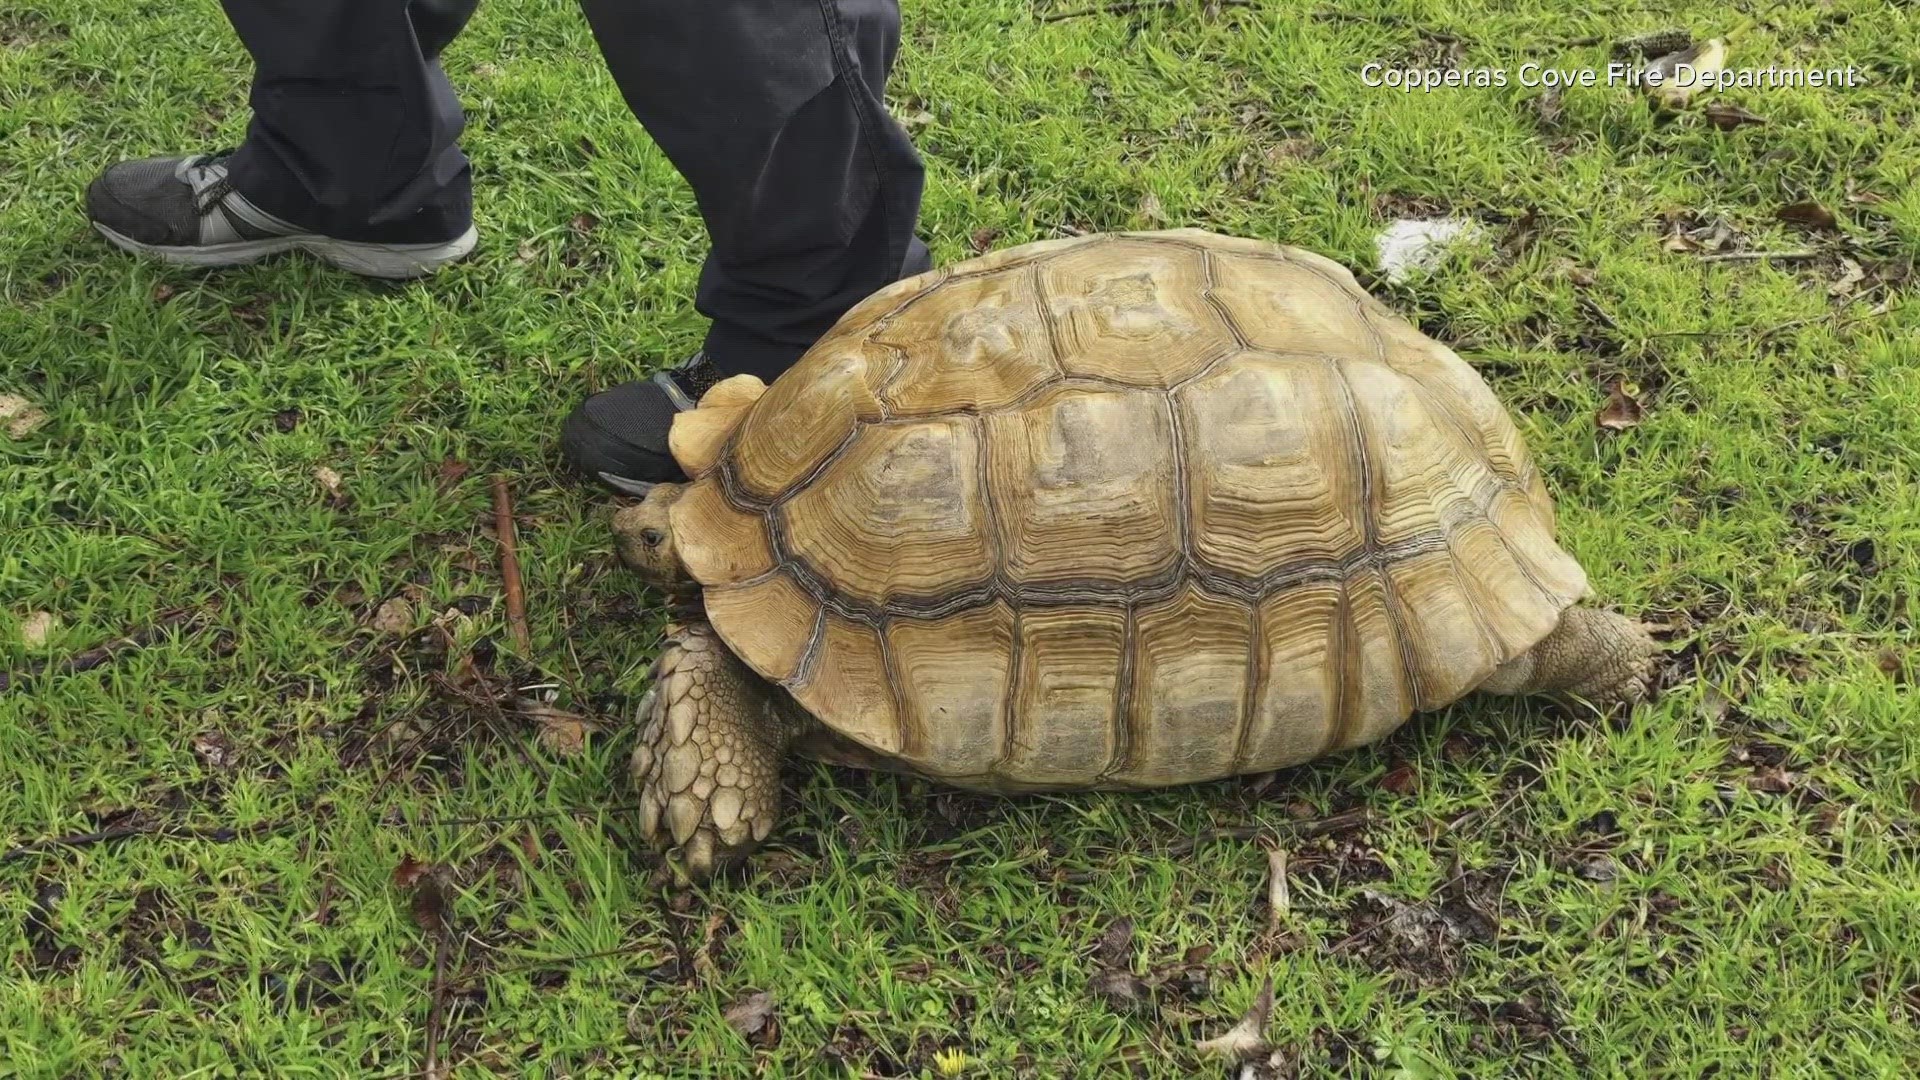 The department said both tortoises have been checked by an animal control officer and deemed to be in "good condition".